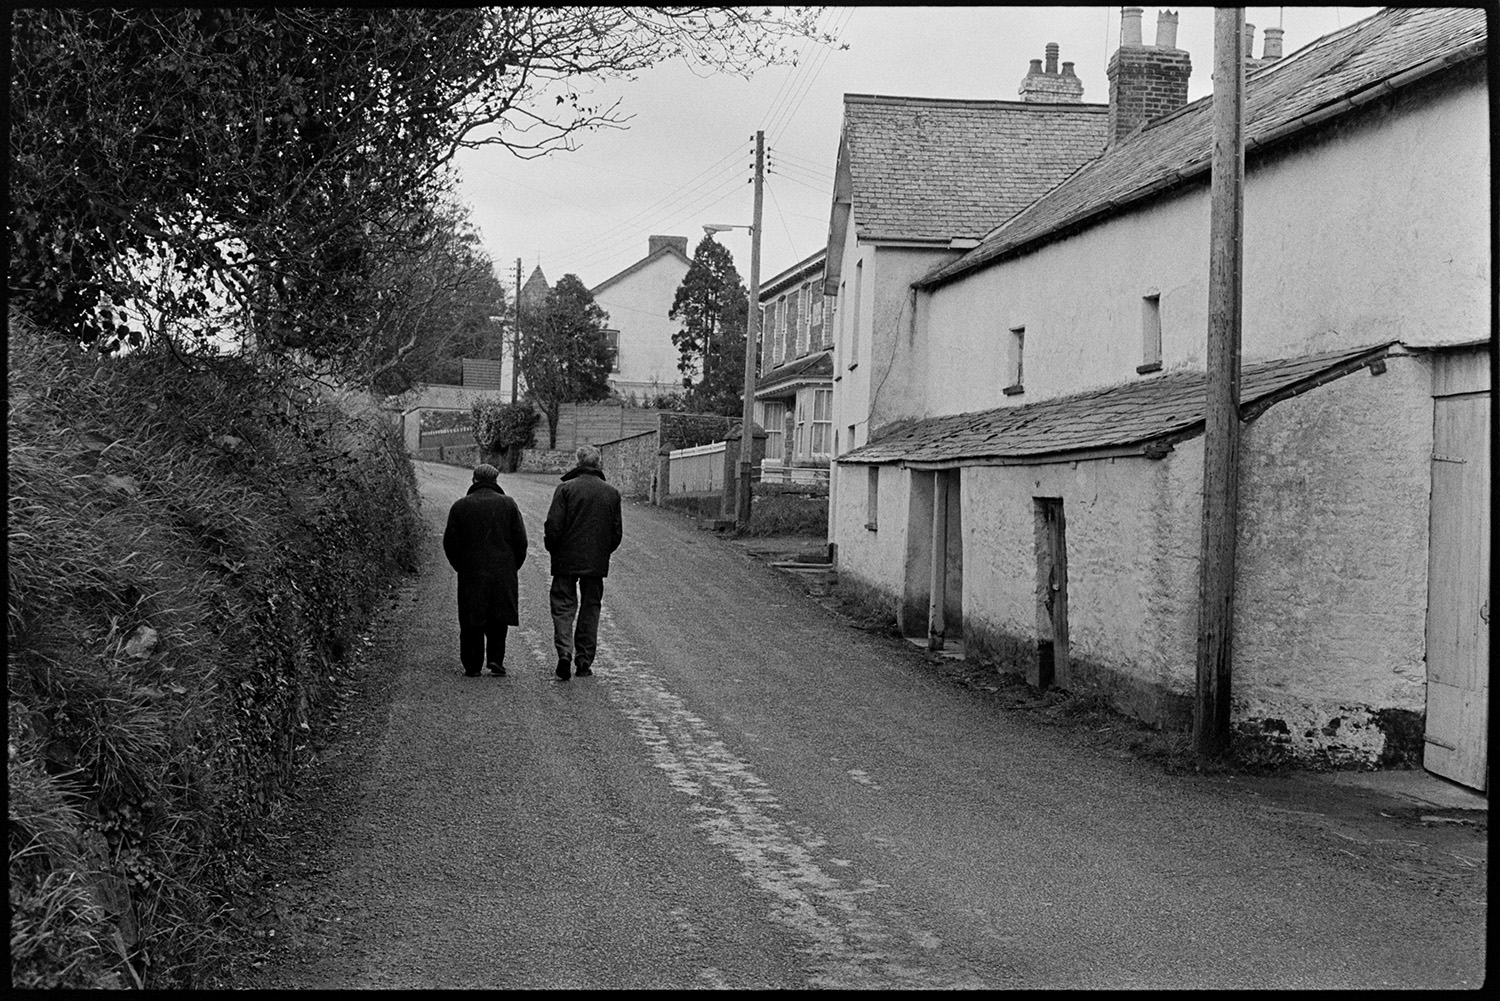 Street scene with porch. 
[Two men walking along Rectory Road, Dolton. Cottages are visible on the right of the road and a hedgebank is on the left.]